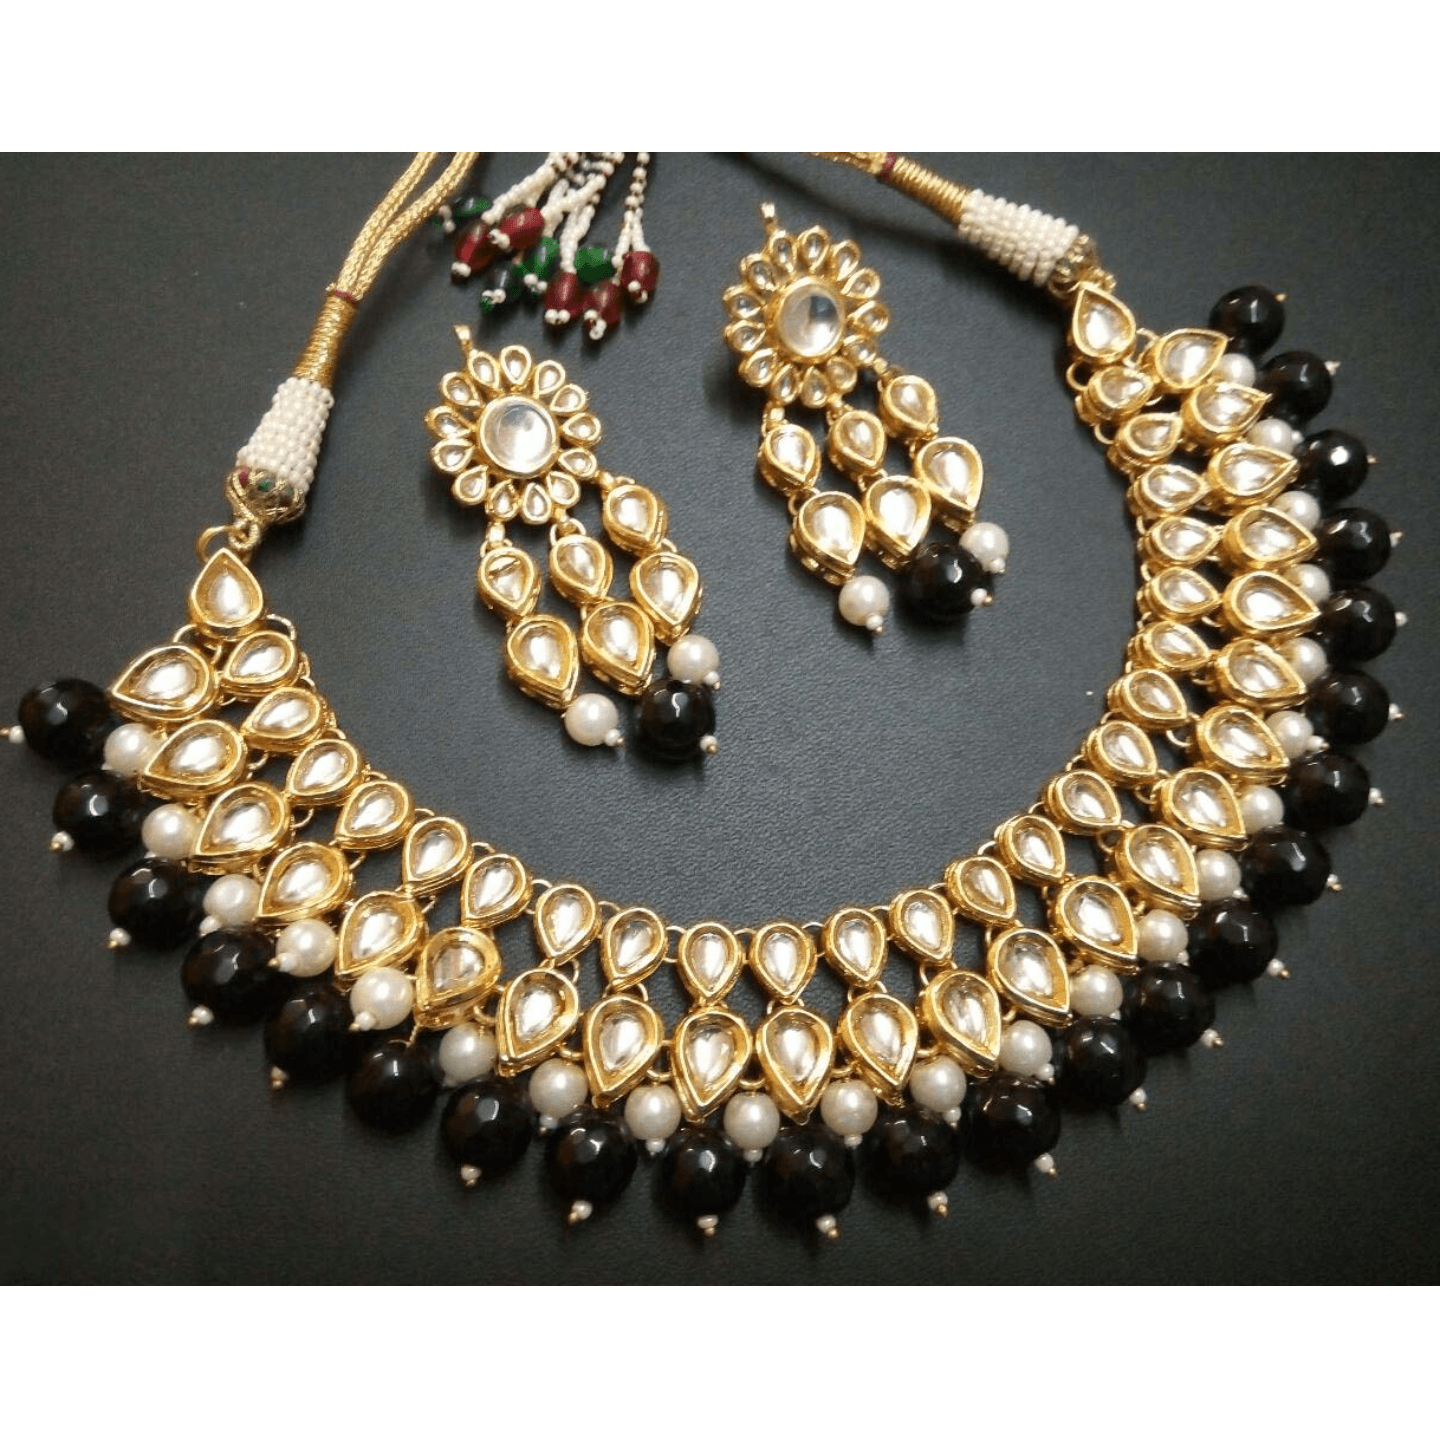 Gold Tone Kundan Necklace Set With Earring Black Onyx Pearls